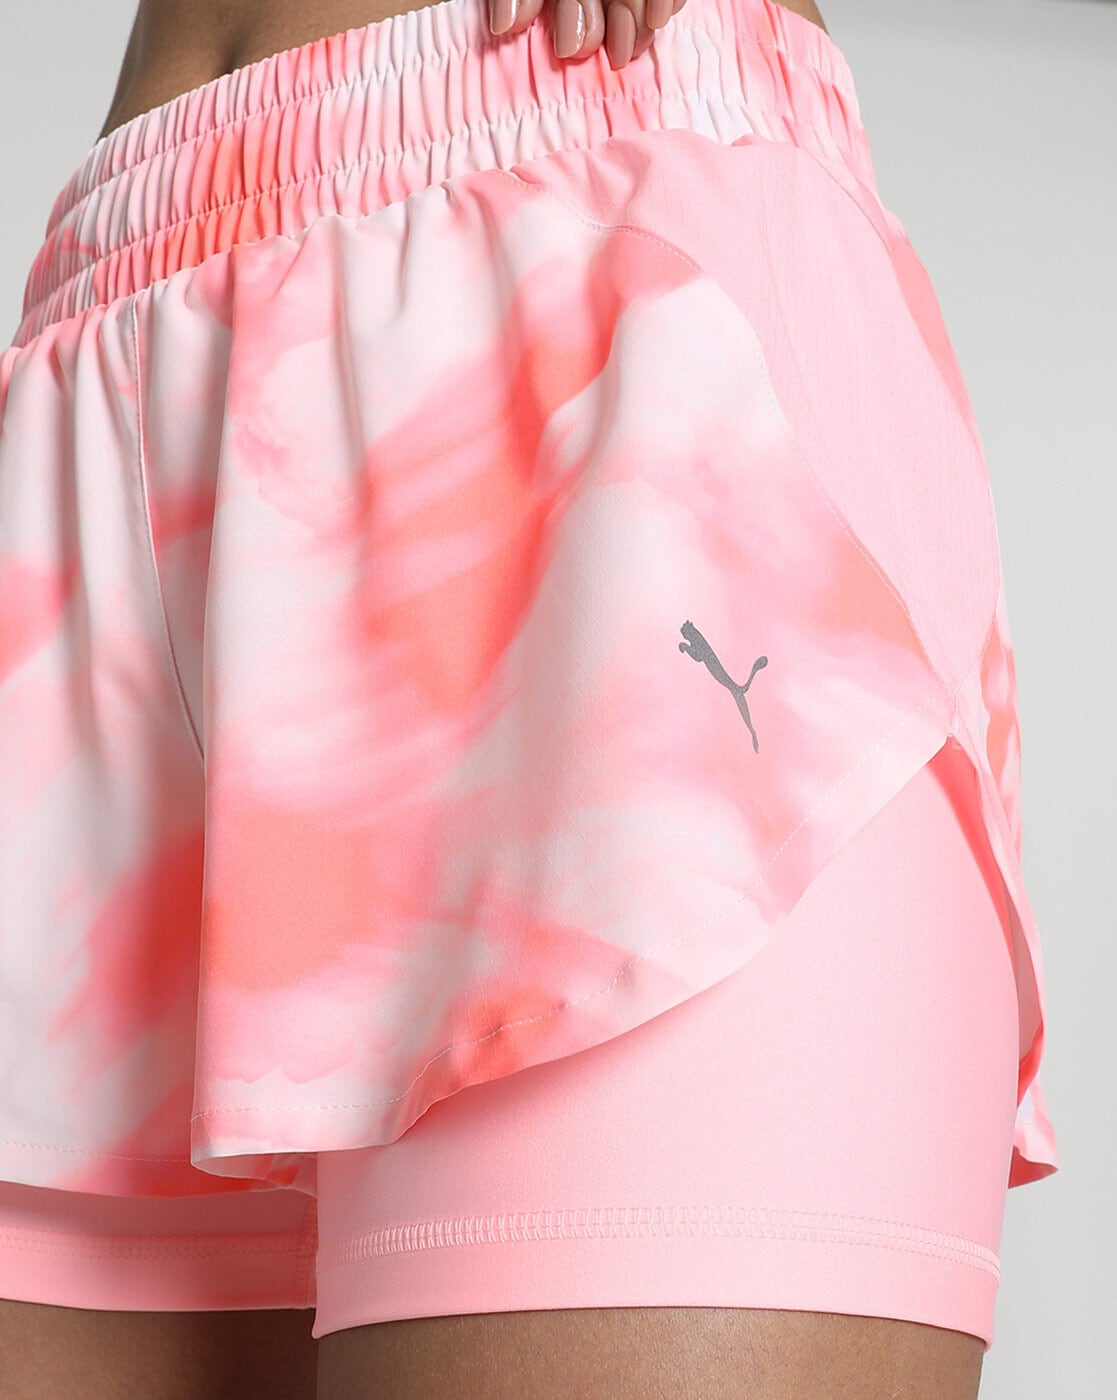 PUMA Buy Shorts Koral Women Ice Online Pink for by